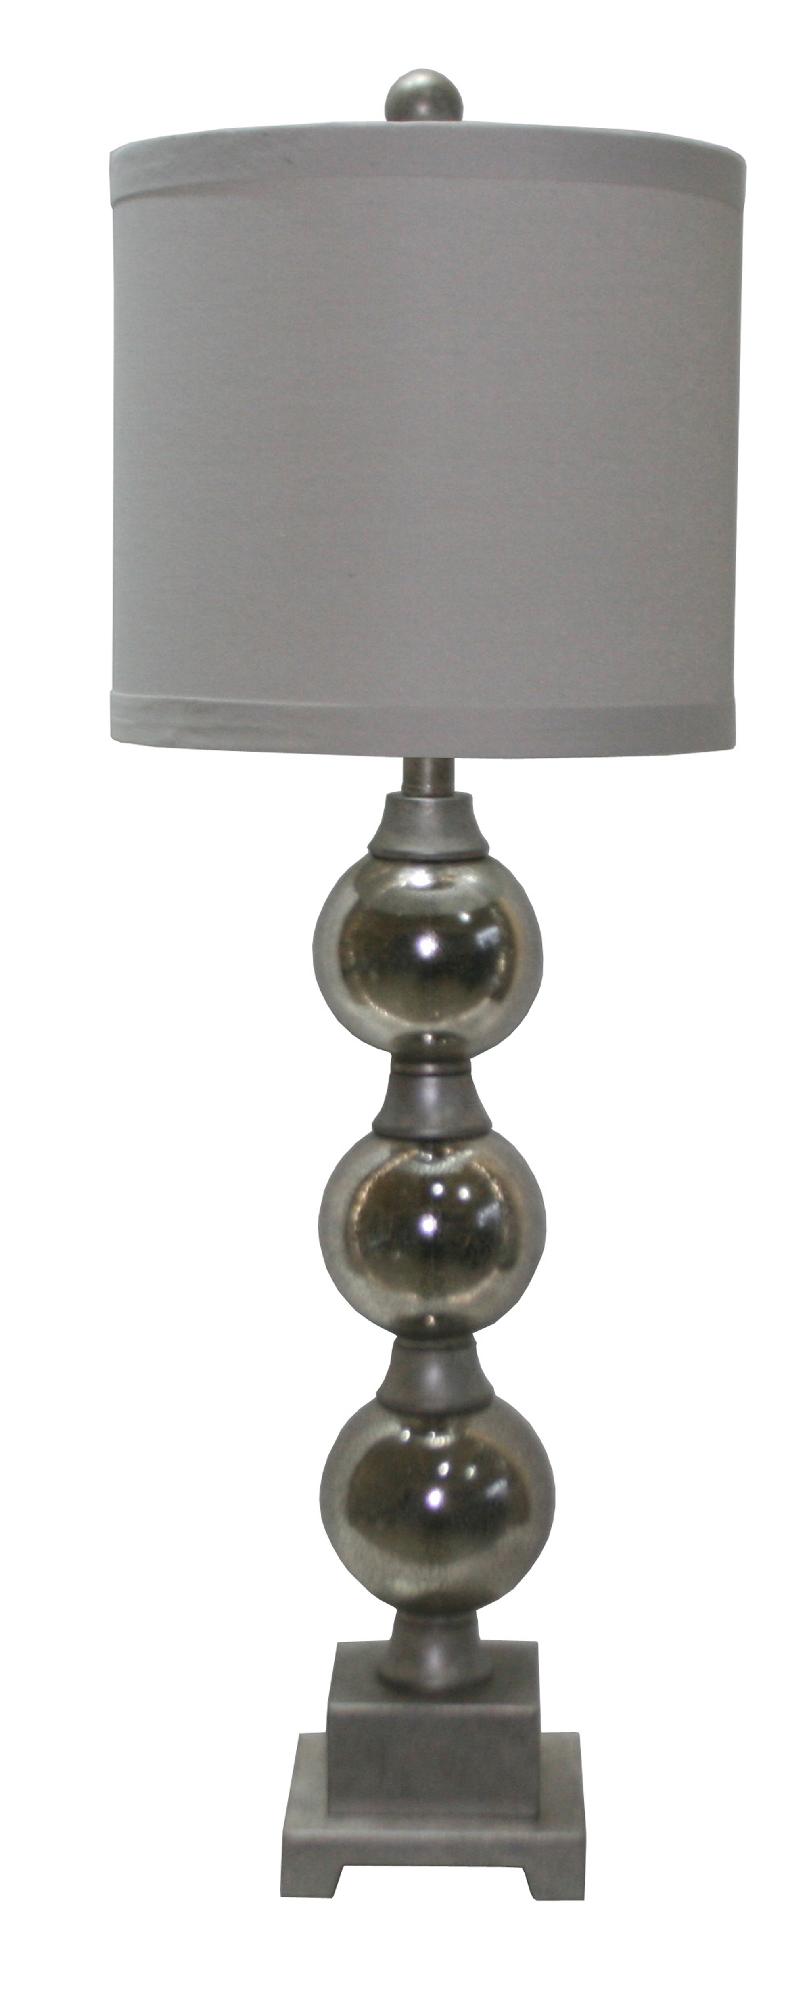 32" Poly & Glass Table Lamp with Mercury Silver Finish.